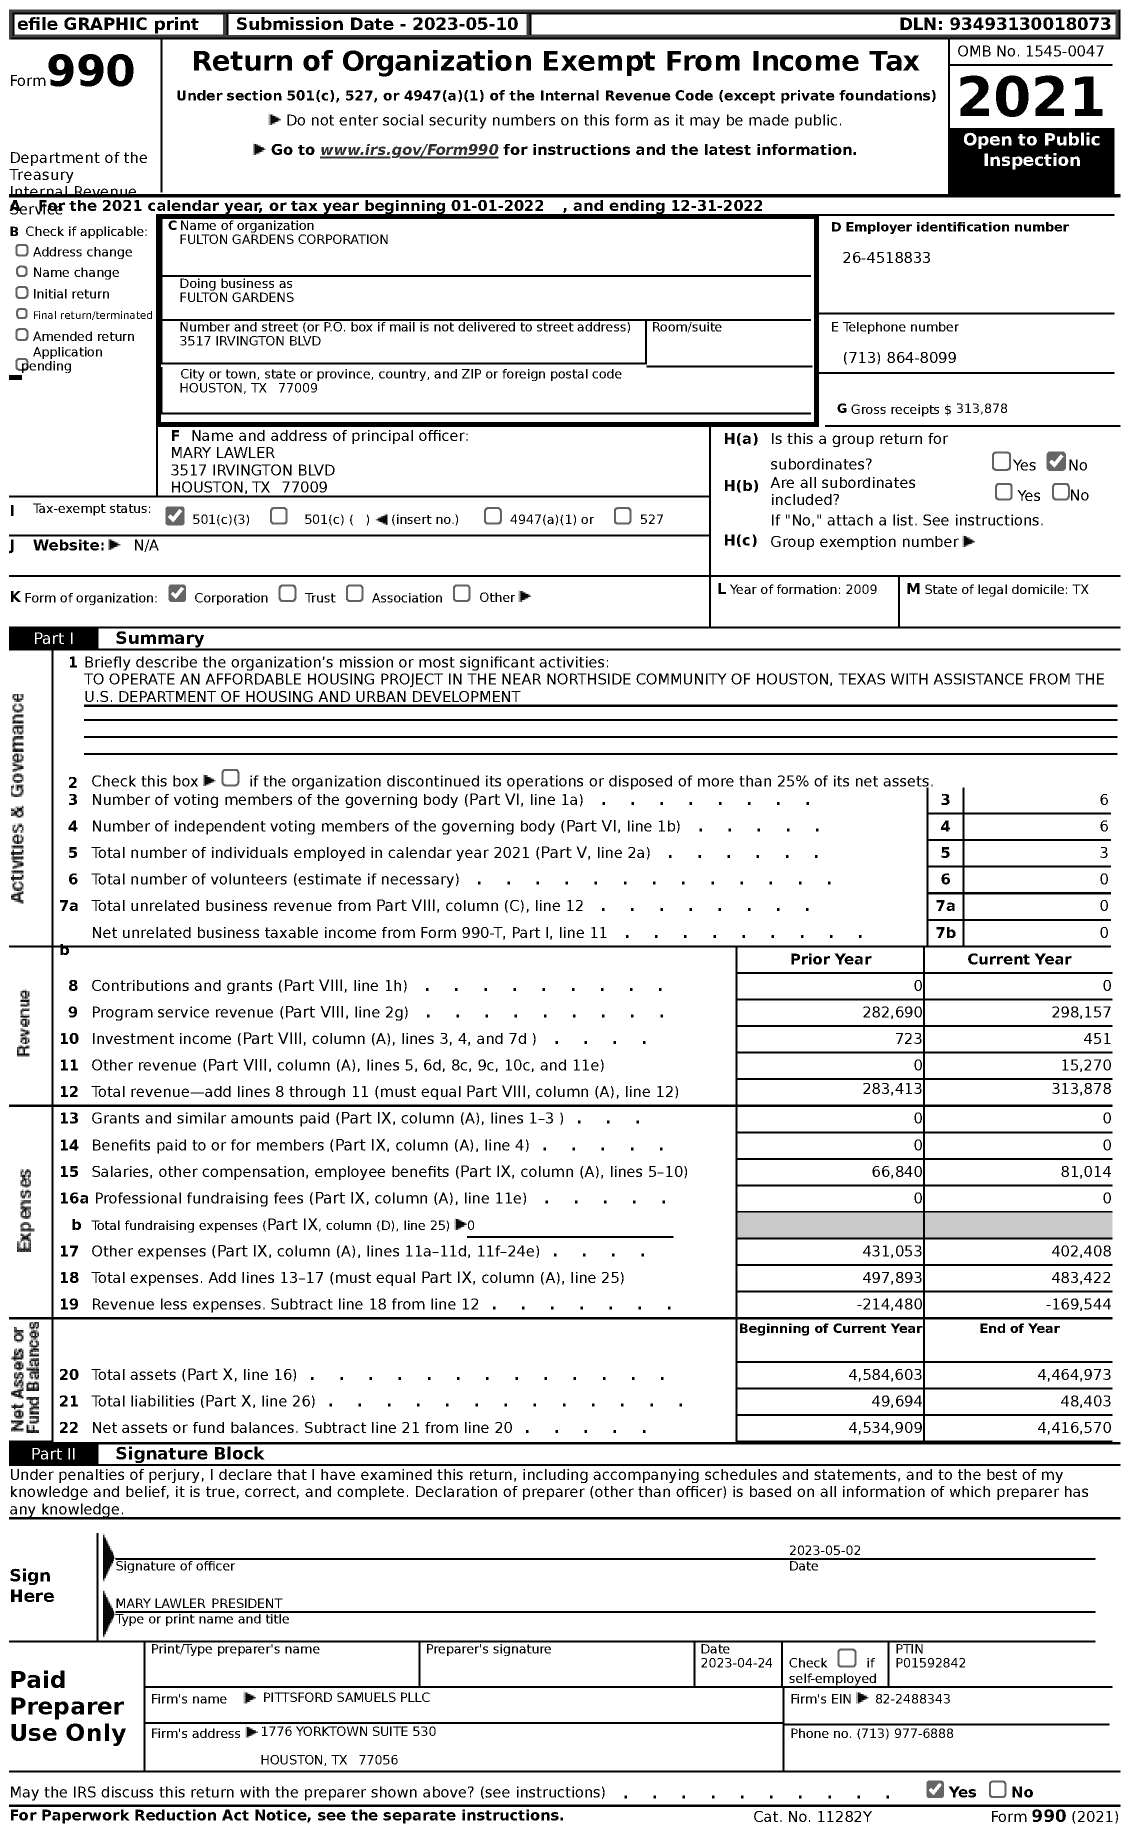 Image of first page of 2022 Form 990 for Fulton Gardens